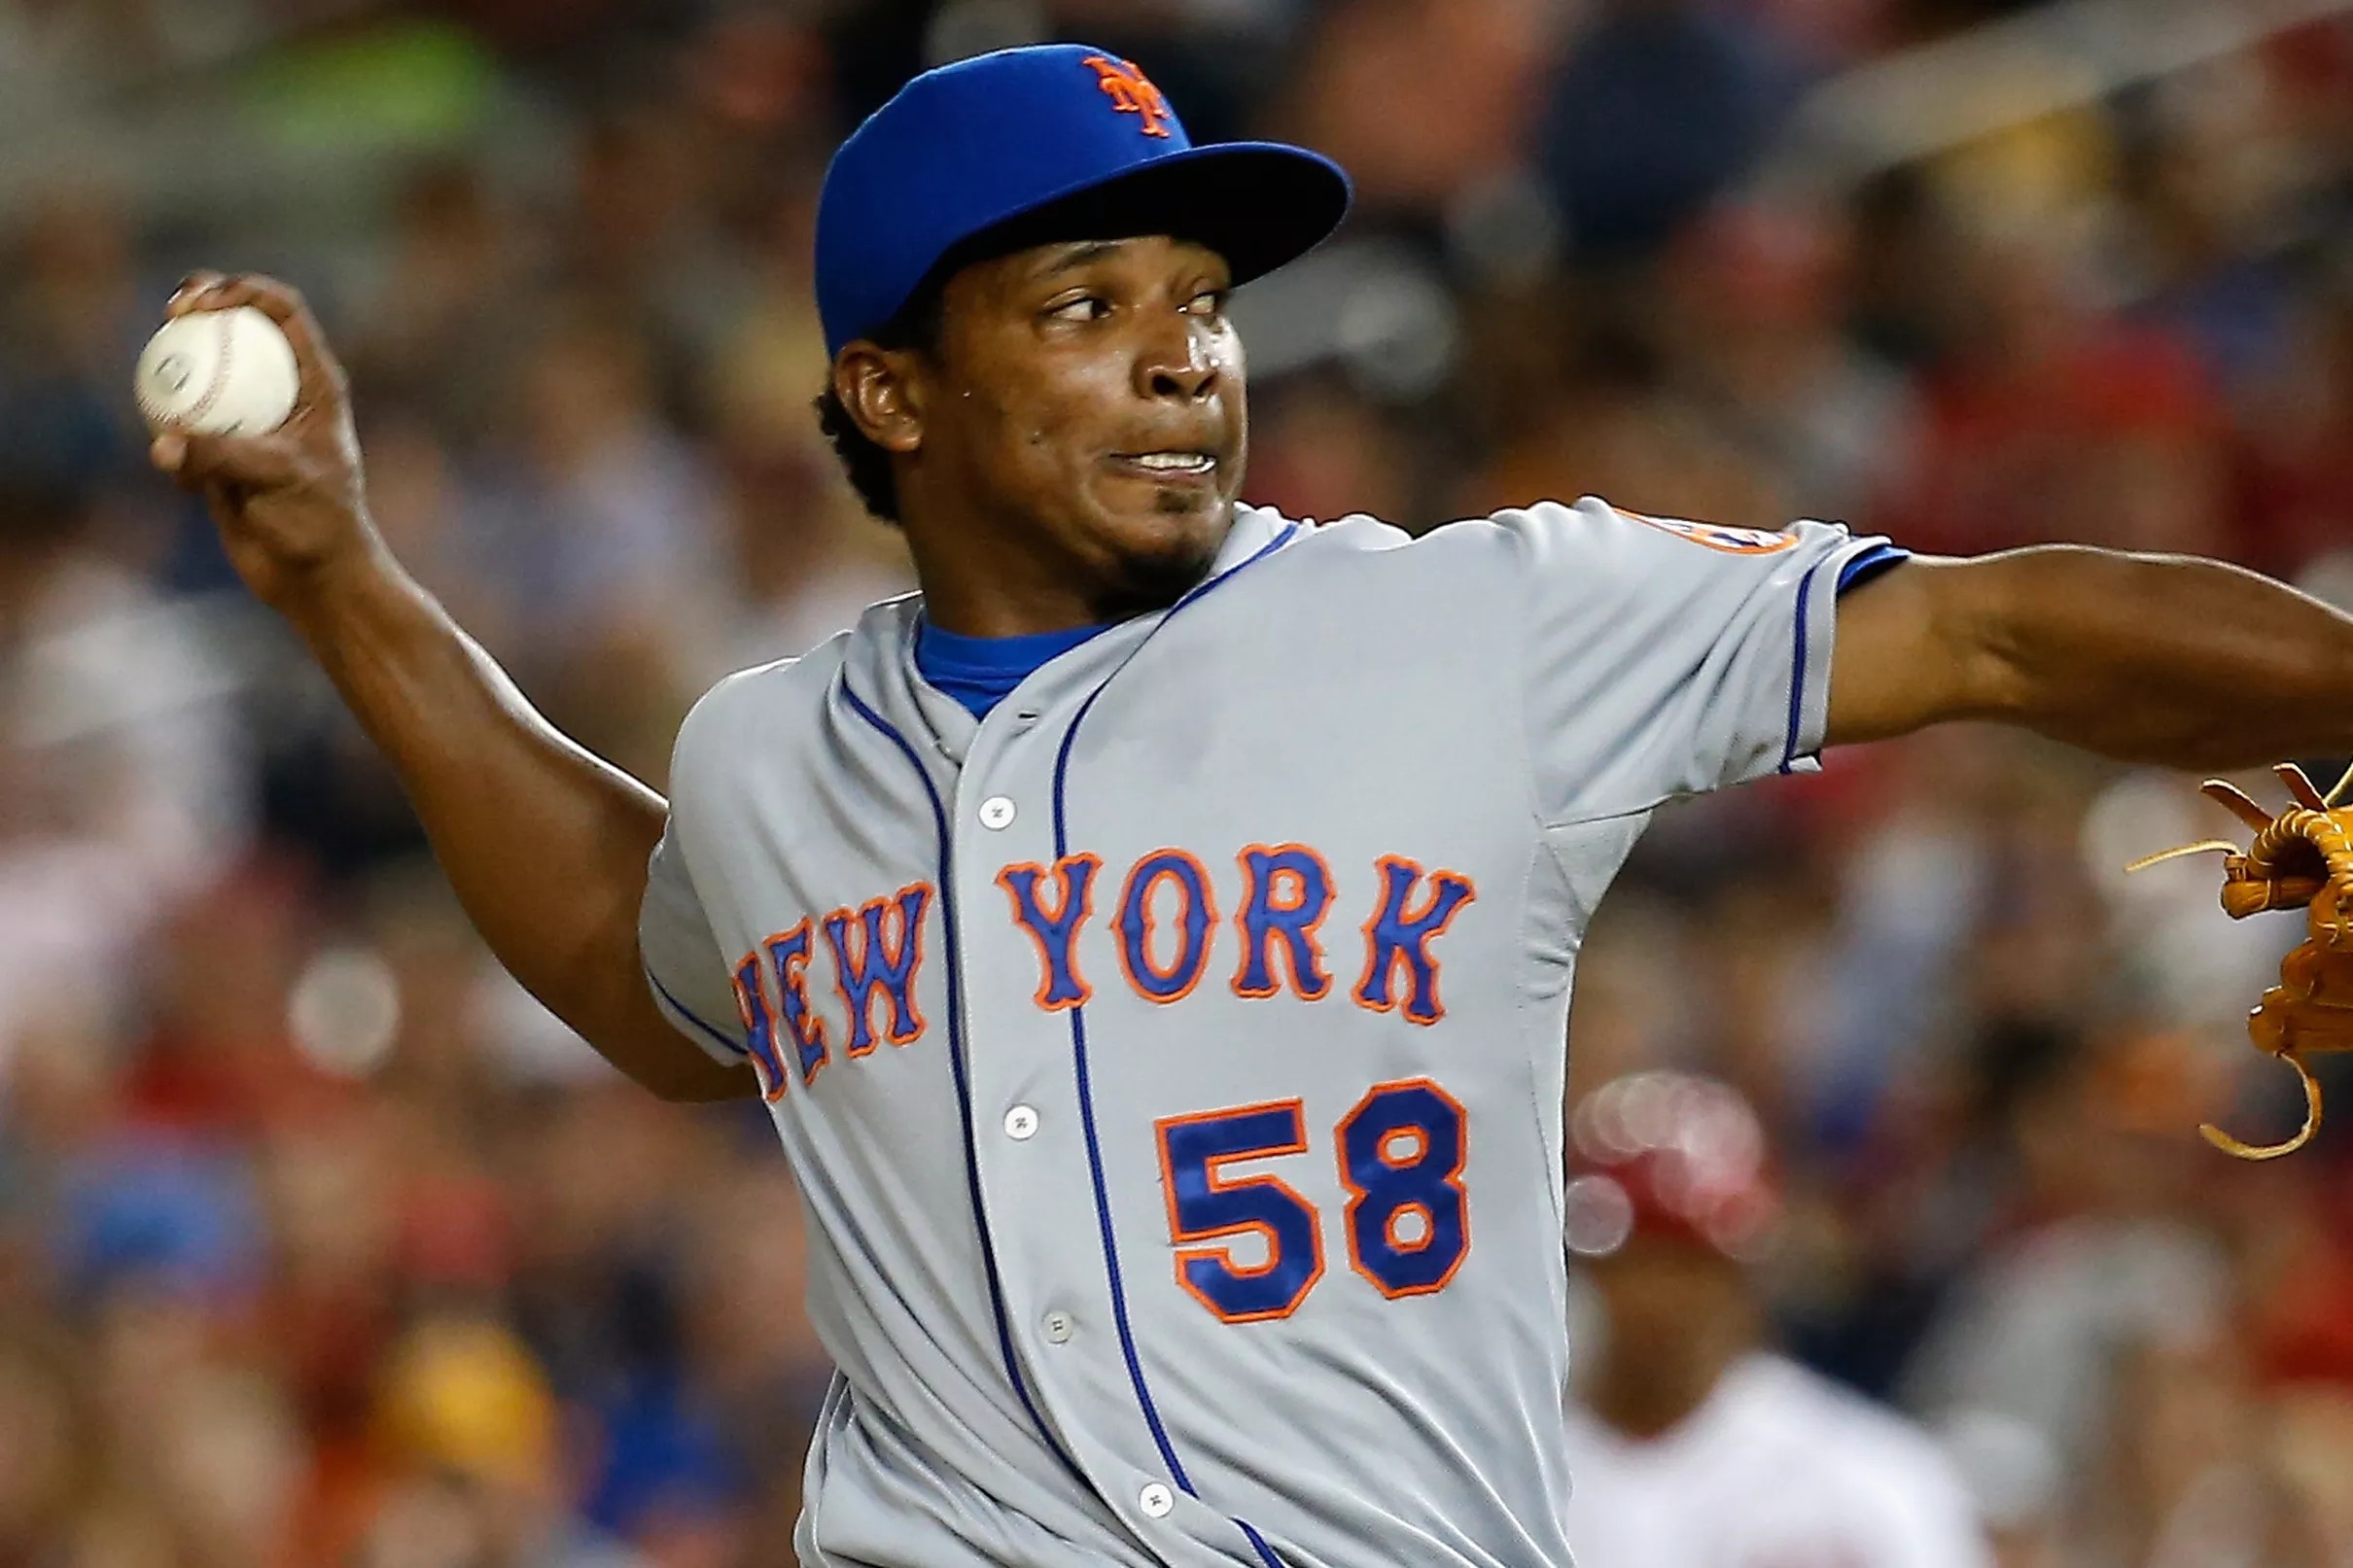 Mets reliever Jenrry Mejia will be reinstated